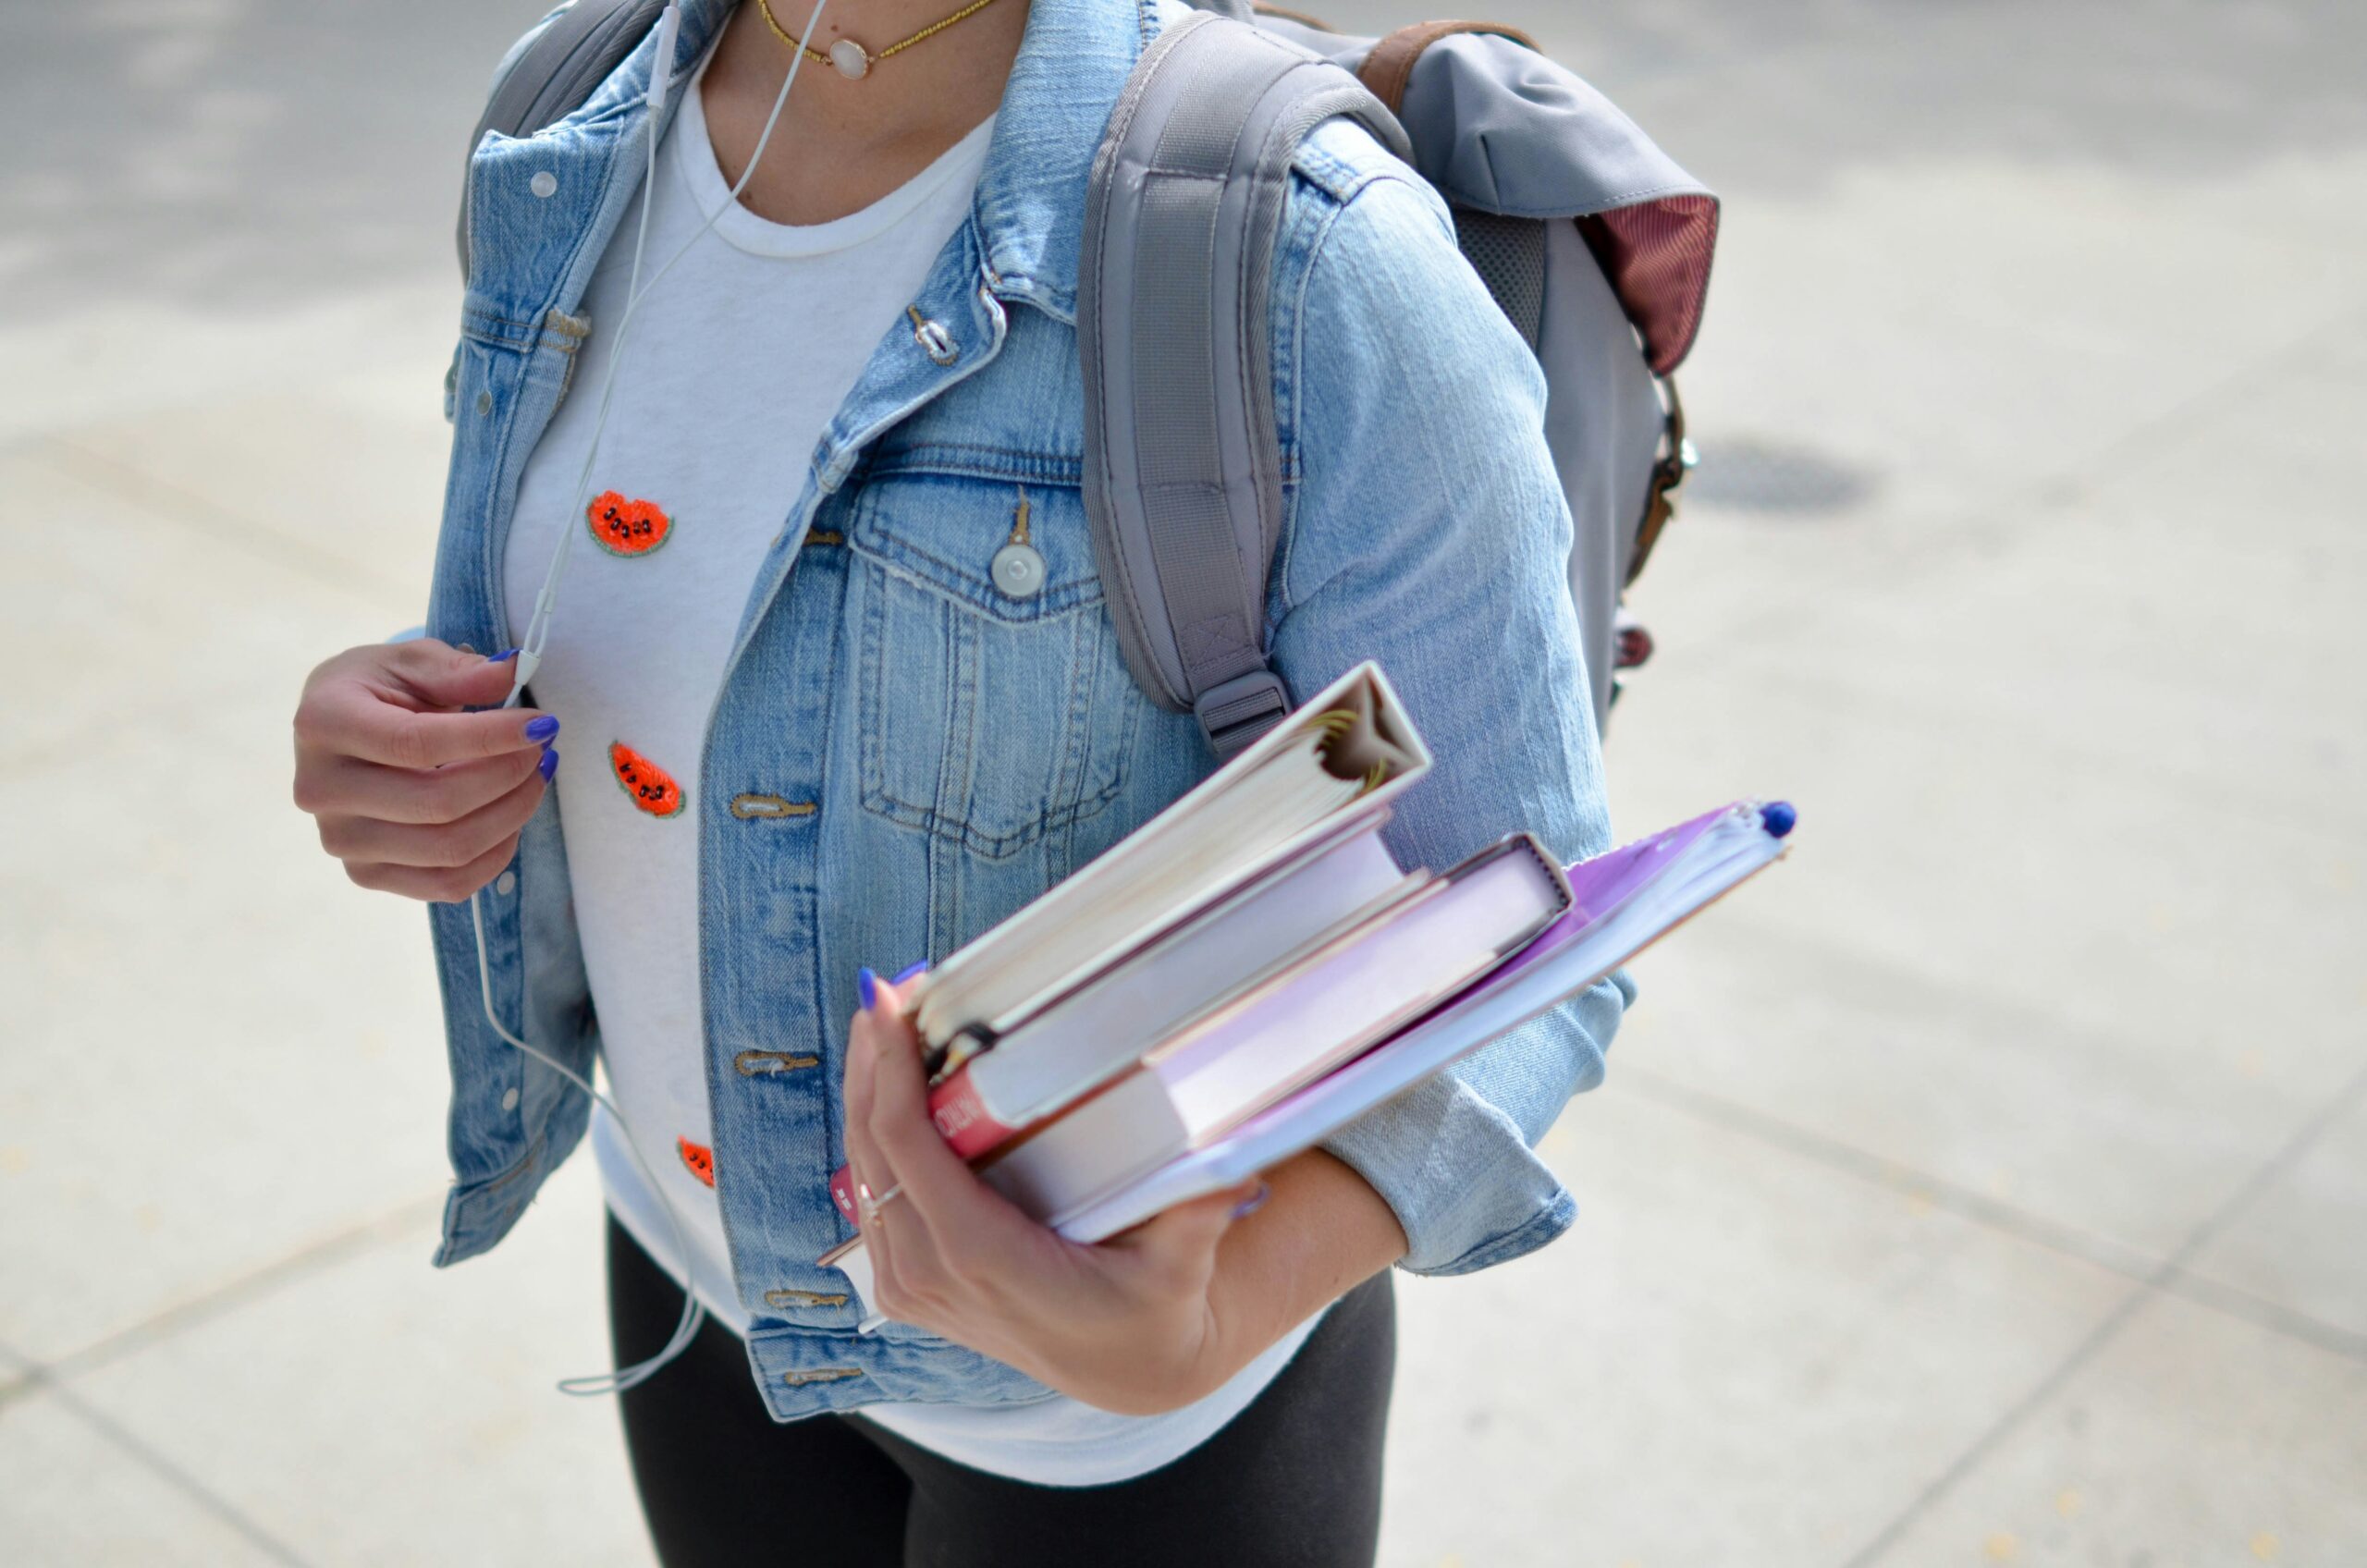 A student wearing their backpack and carrying textbooks and notepads for class